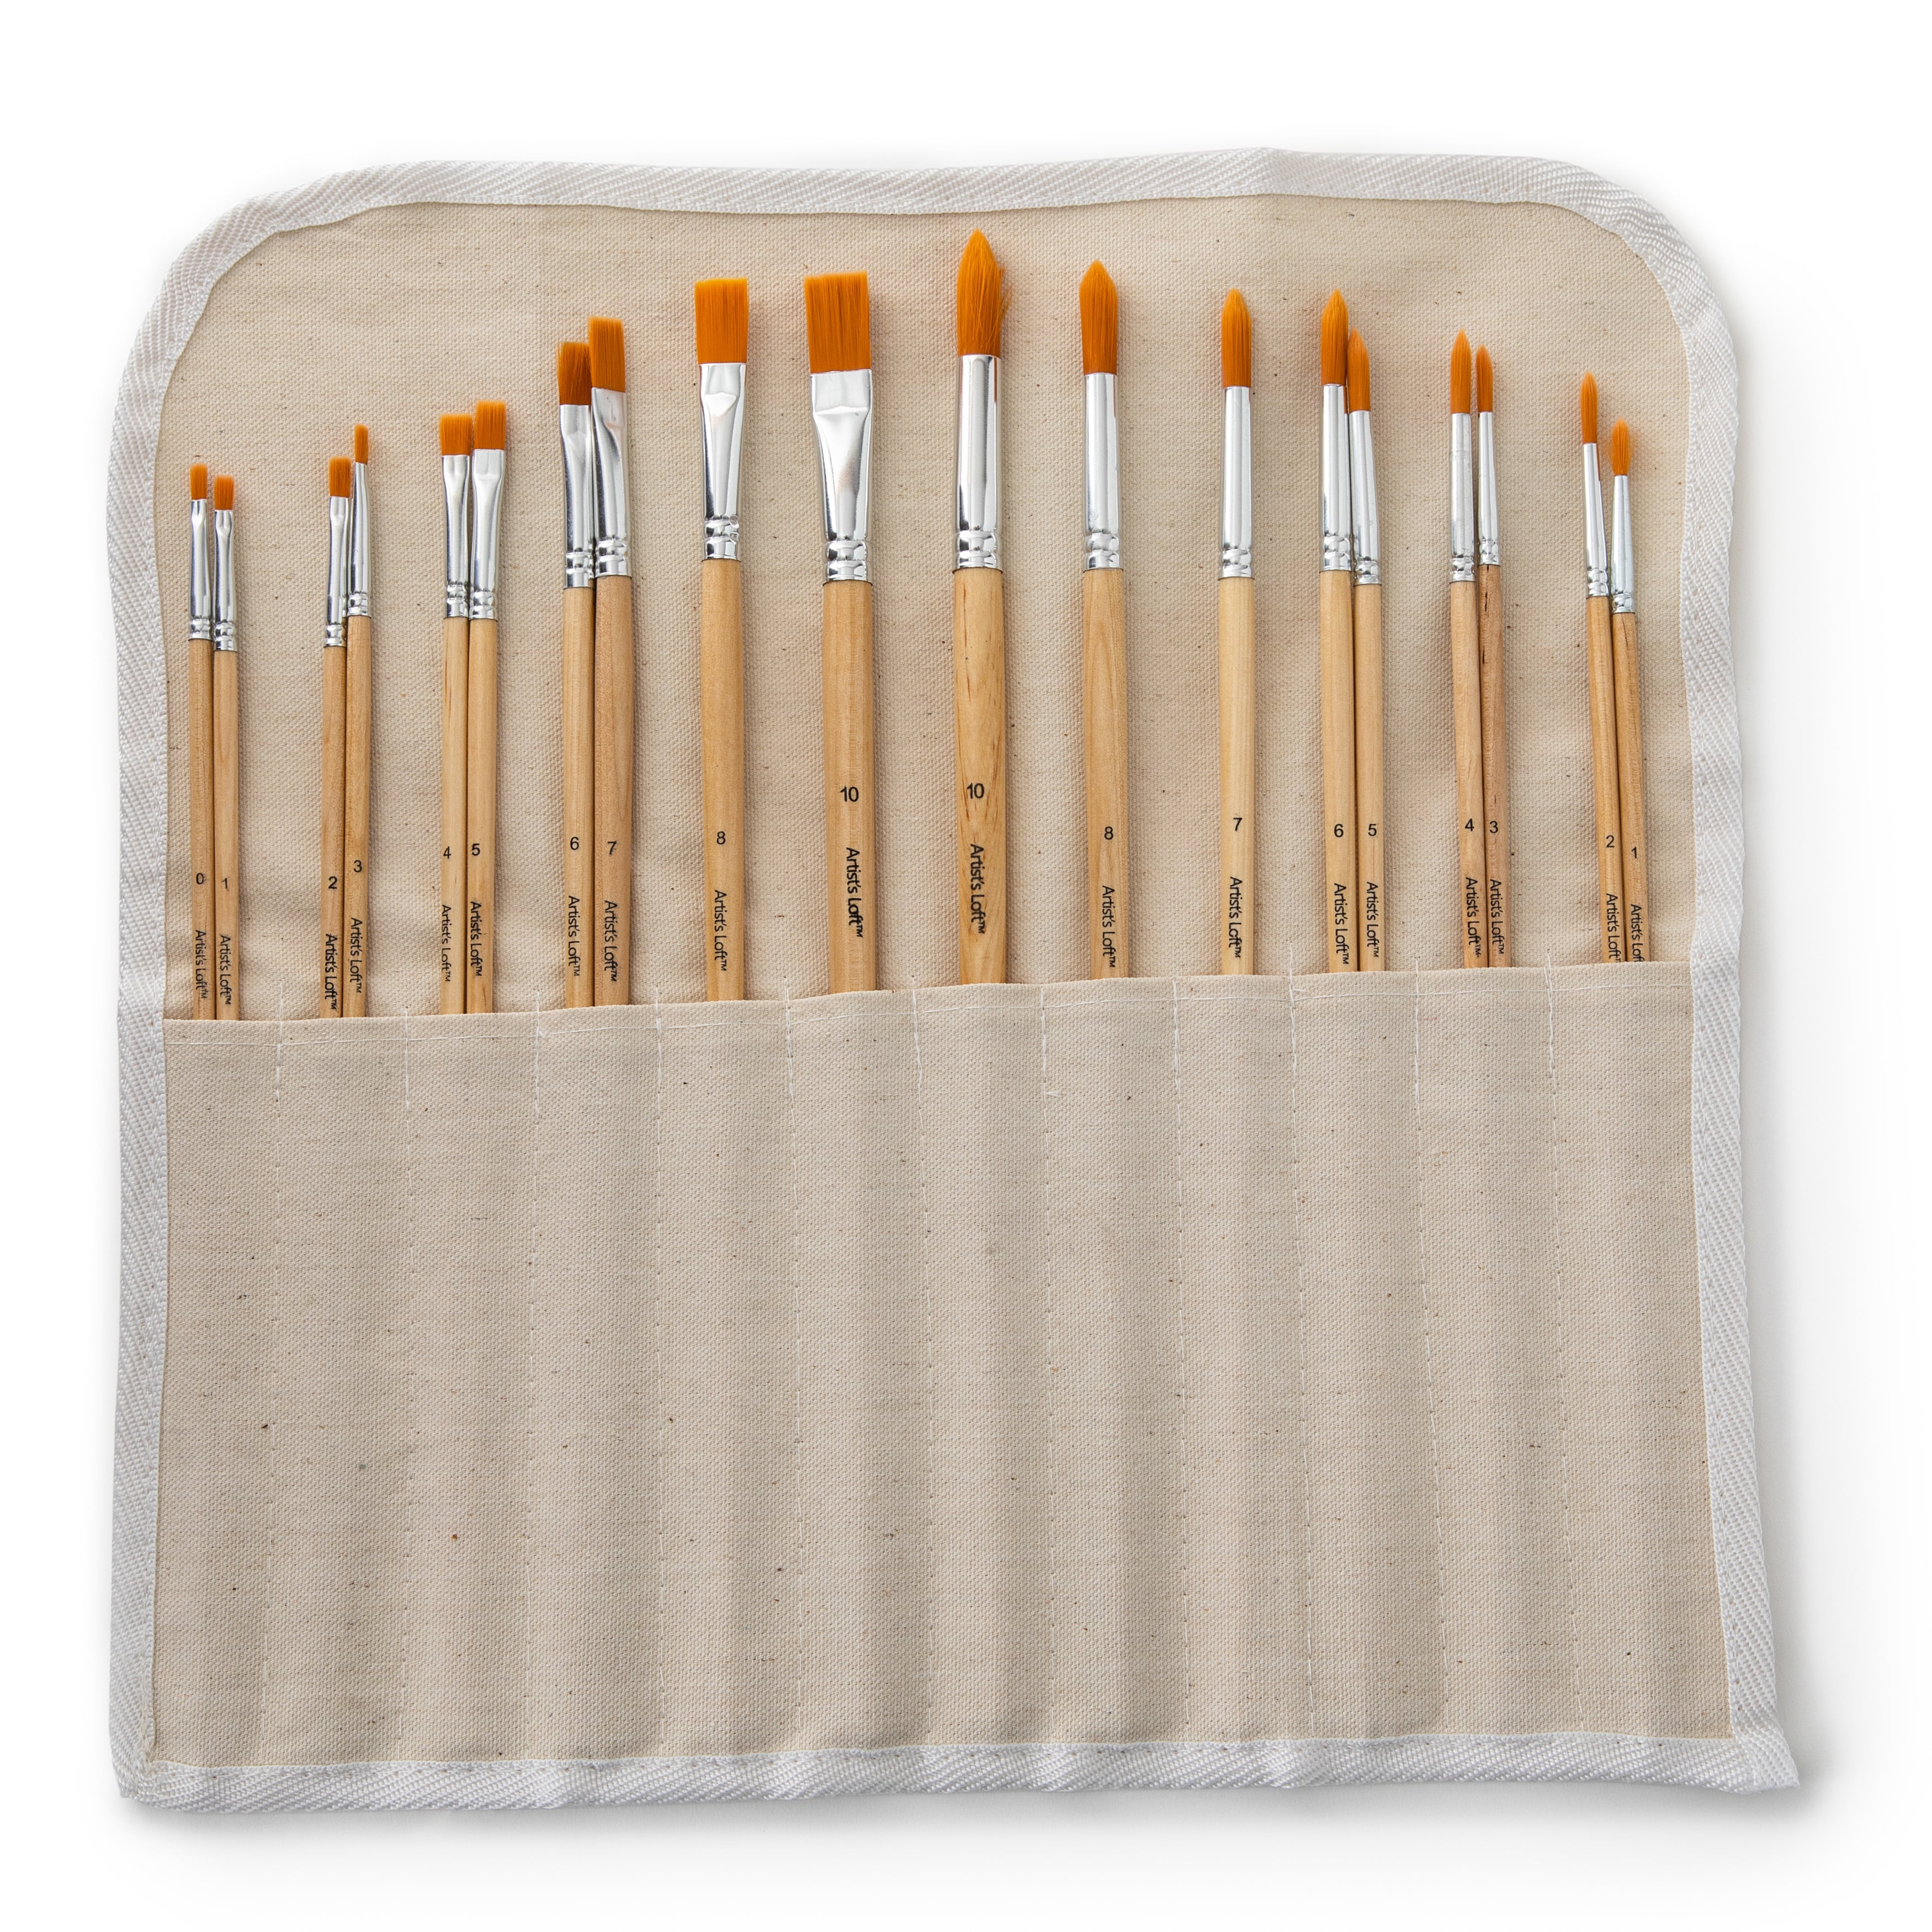 8 Piece Golden Synthetic Acrylic Brushes By Artist's Loft